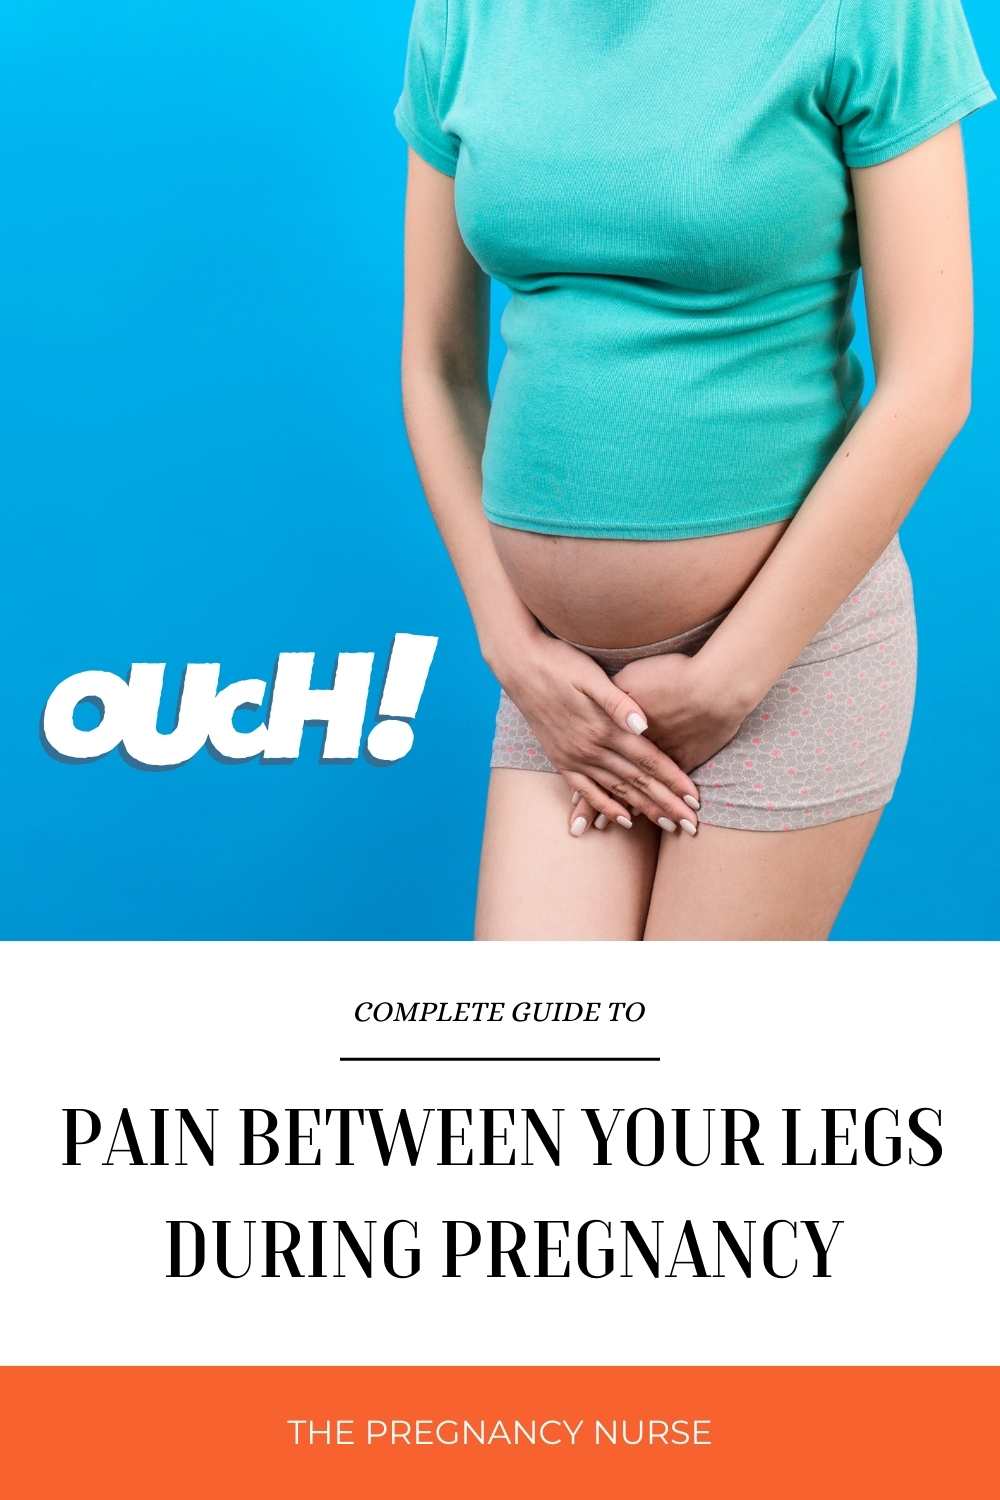 Looking for ways to alleviate pain between your legs during pregnancy? Explore 5 helpful tips and solutions from an experienced labor and delivery nurse, and reclaim your comfort today!